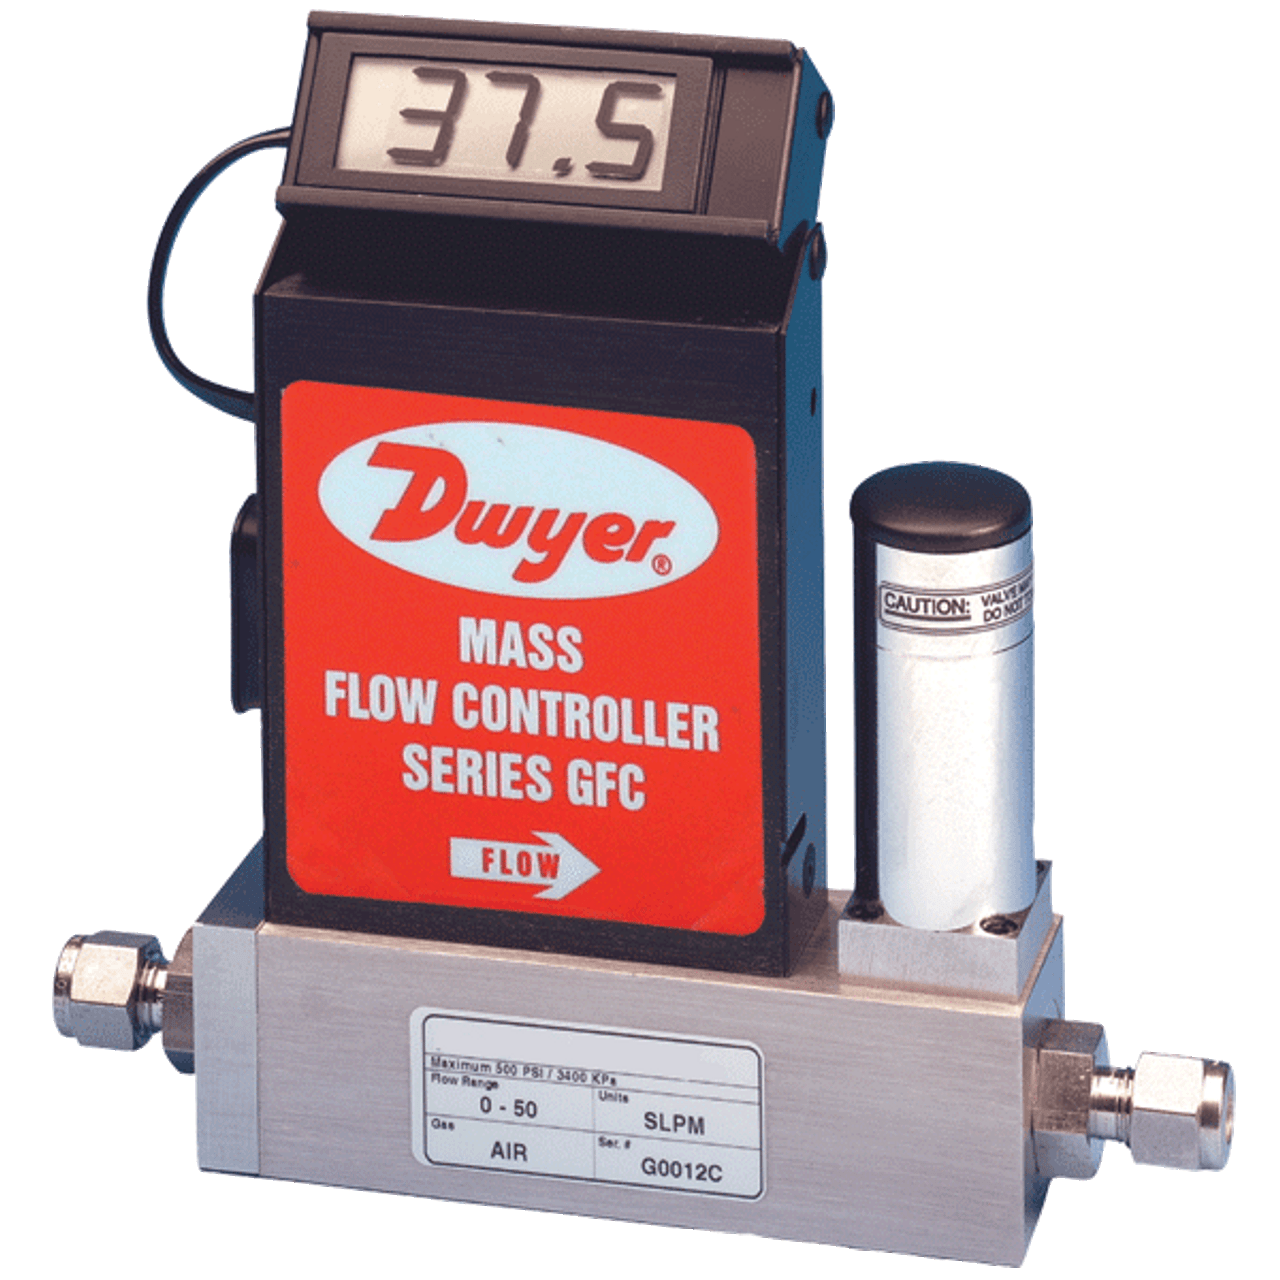 Series GFC Gas Mass Flow Controller - Flow Range Up to 1000 L/min, Pressures Up to 500 psi, NIST Traceable.